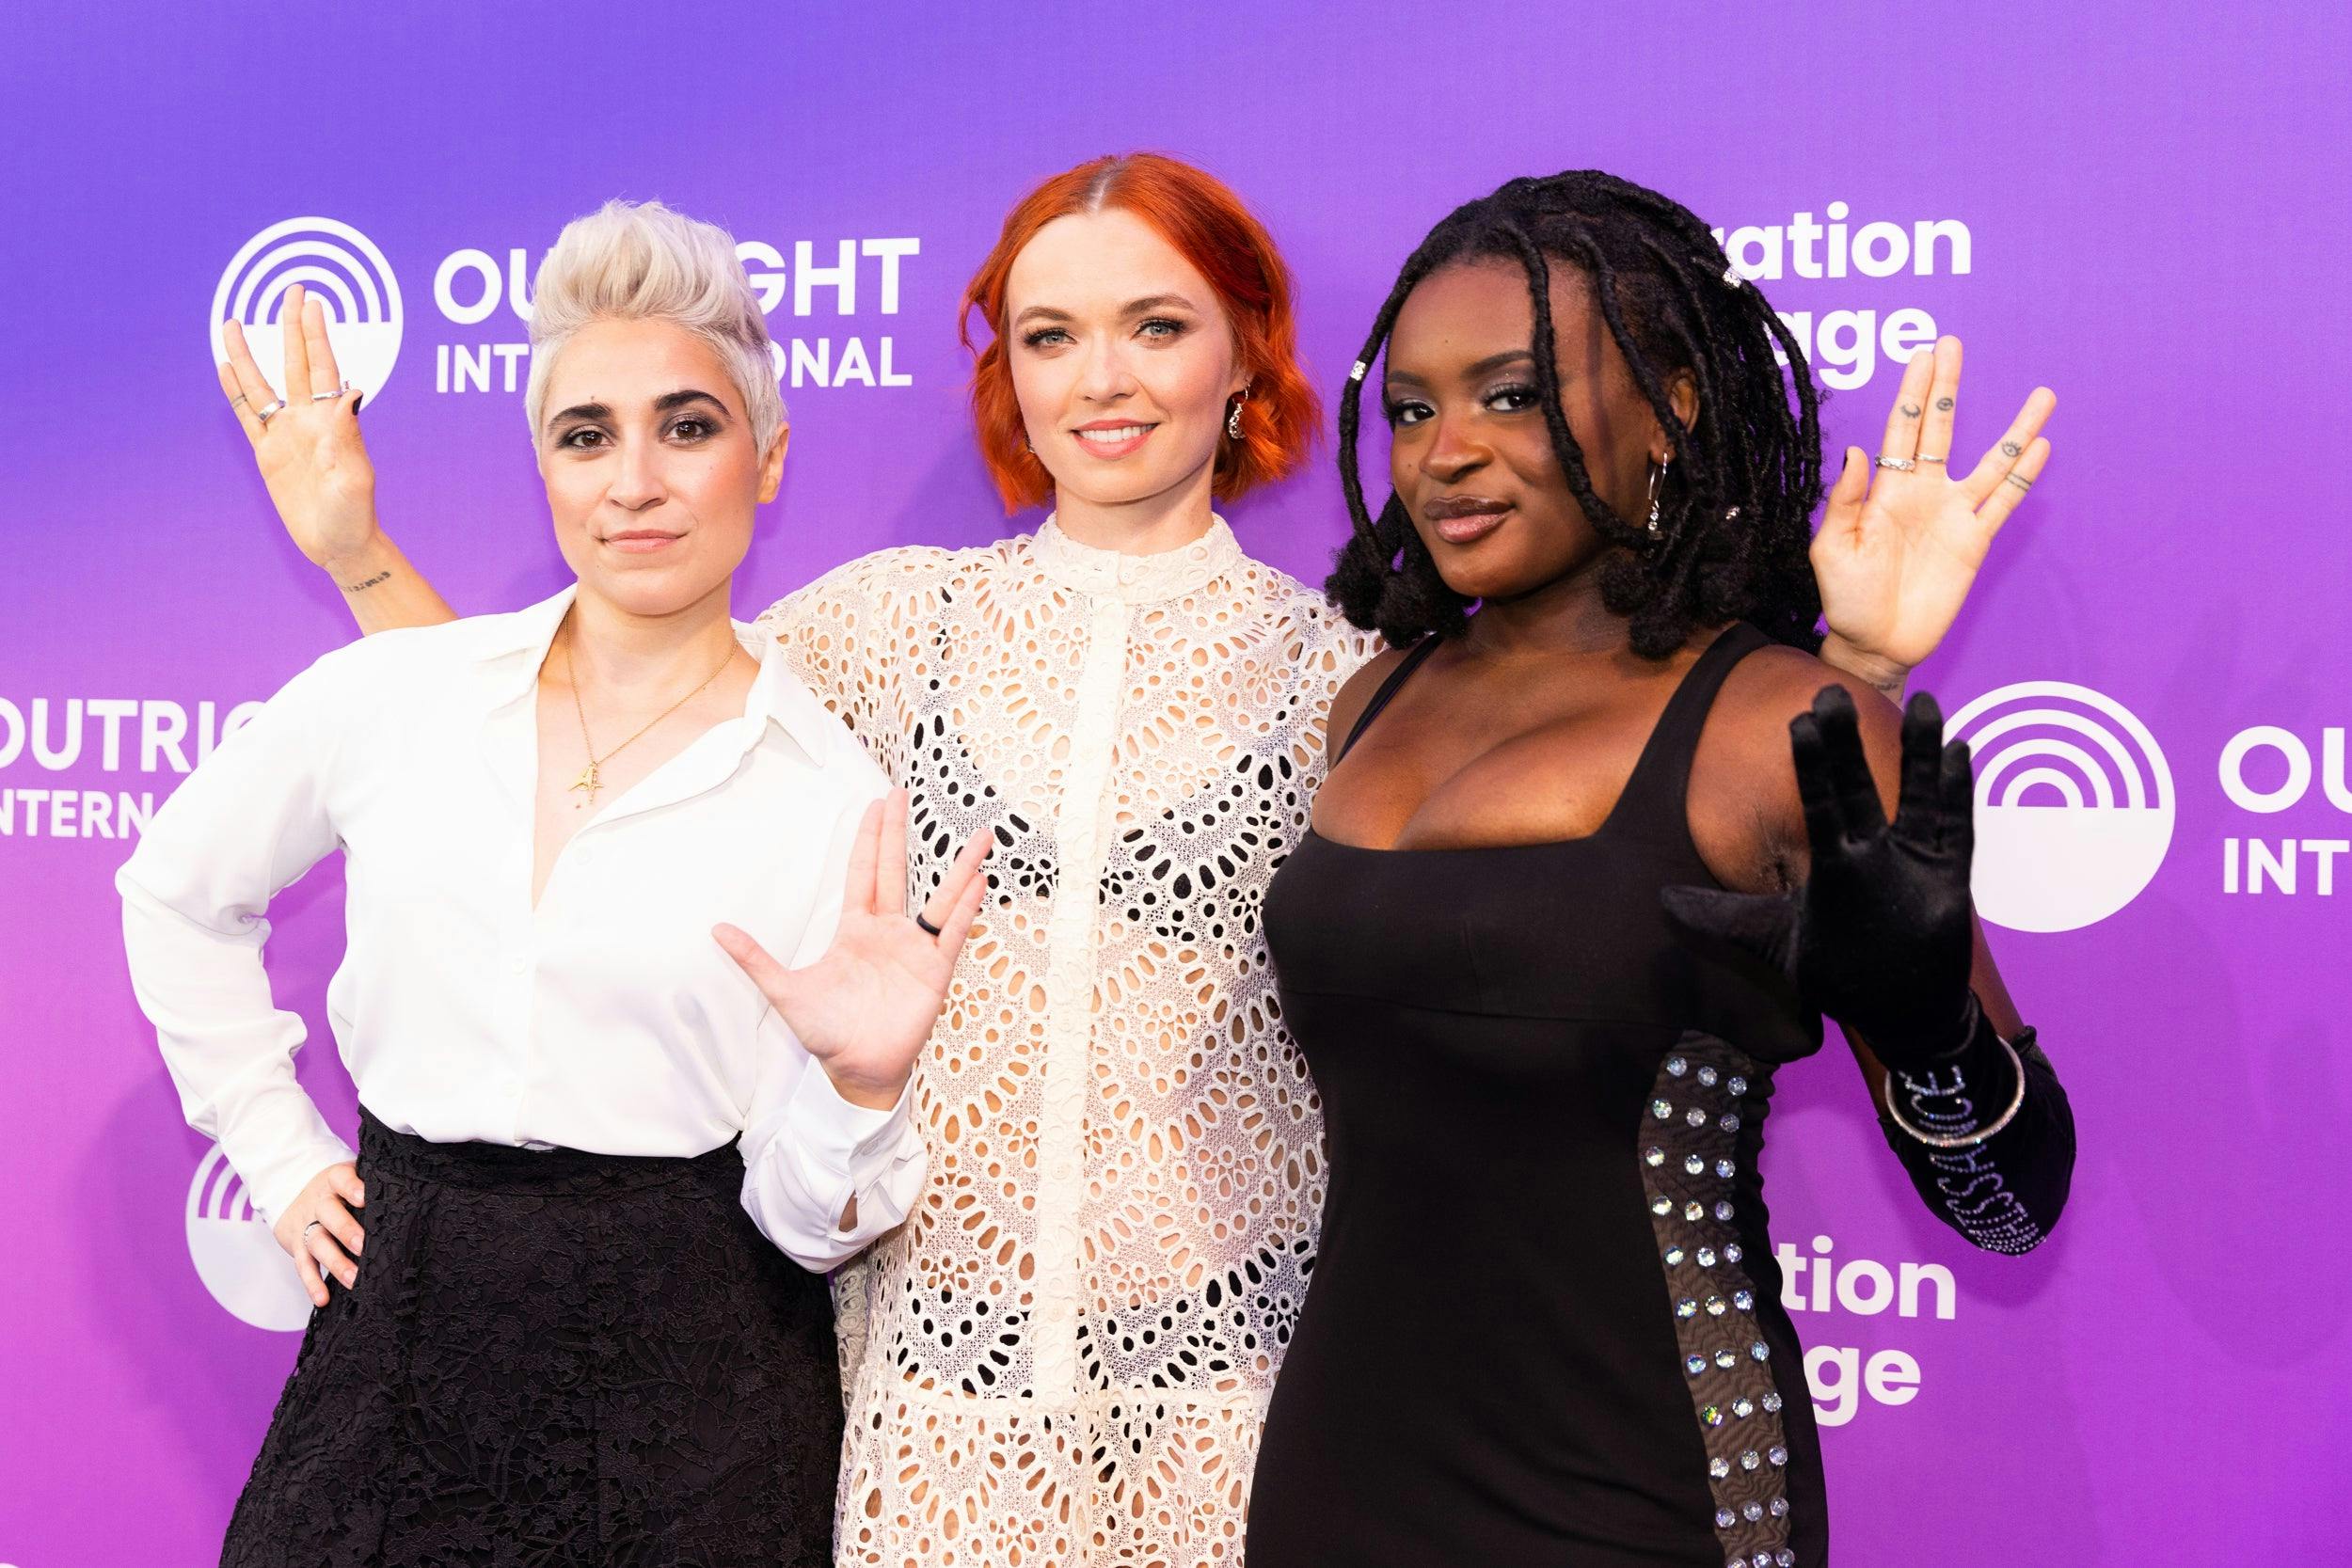 Star Trek: Strange New Worlds' Melissa Navia, Jess Bush, and Celia Rose Gooding on the red carpet for 27th Celebration of Courage Awards and Gala